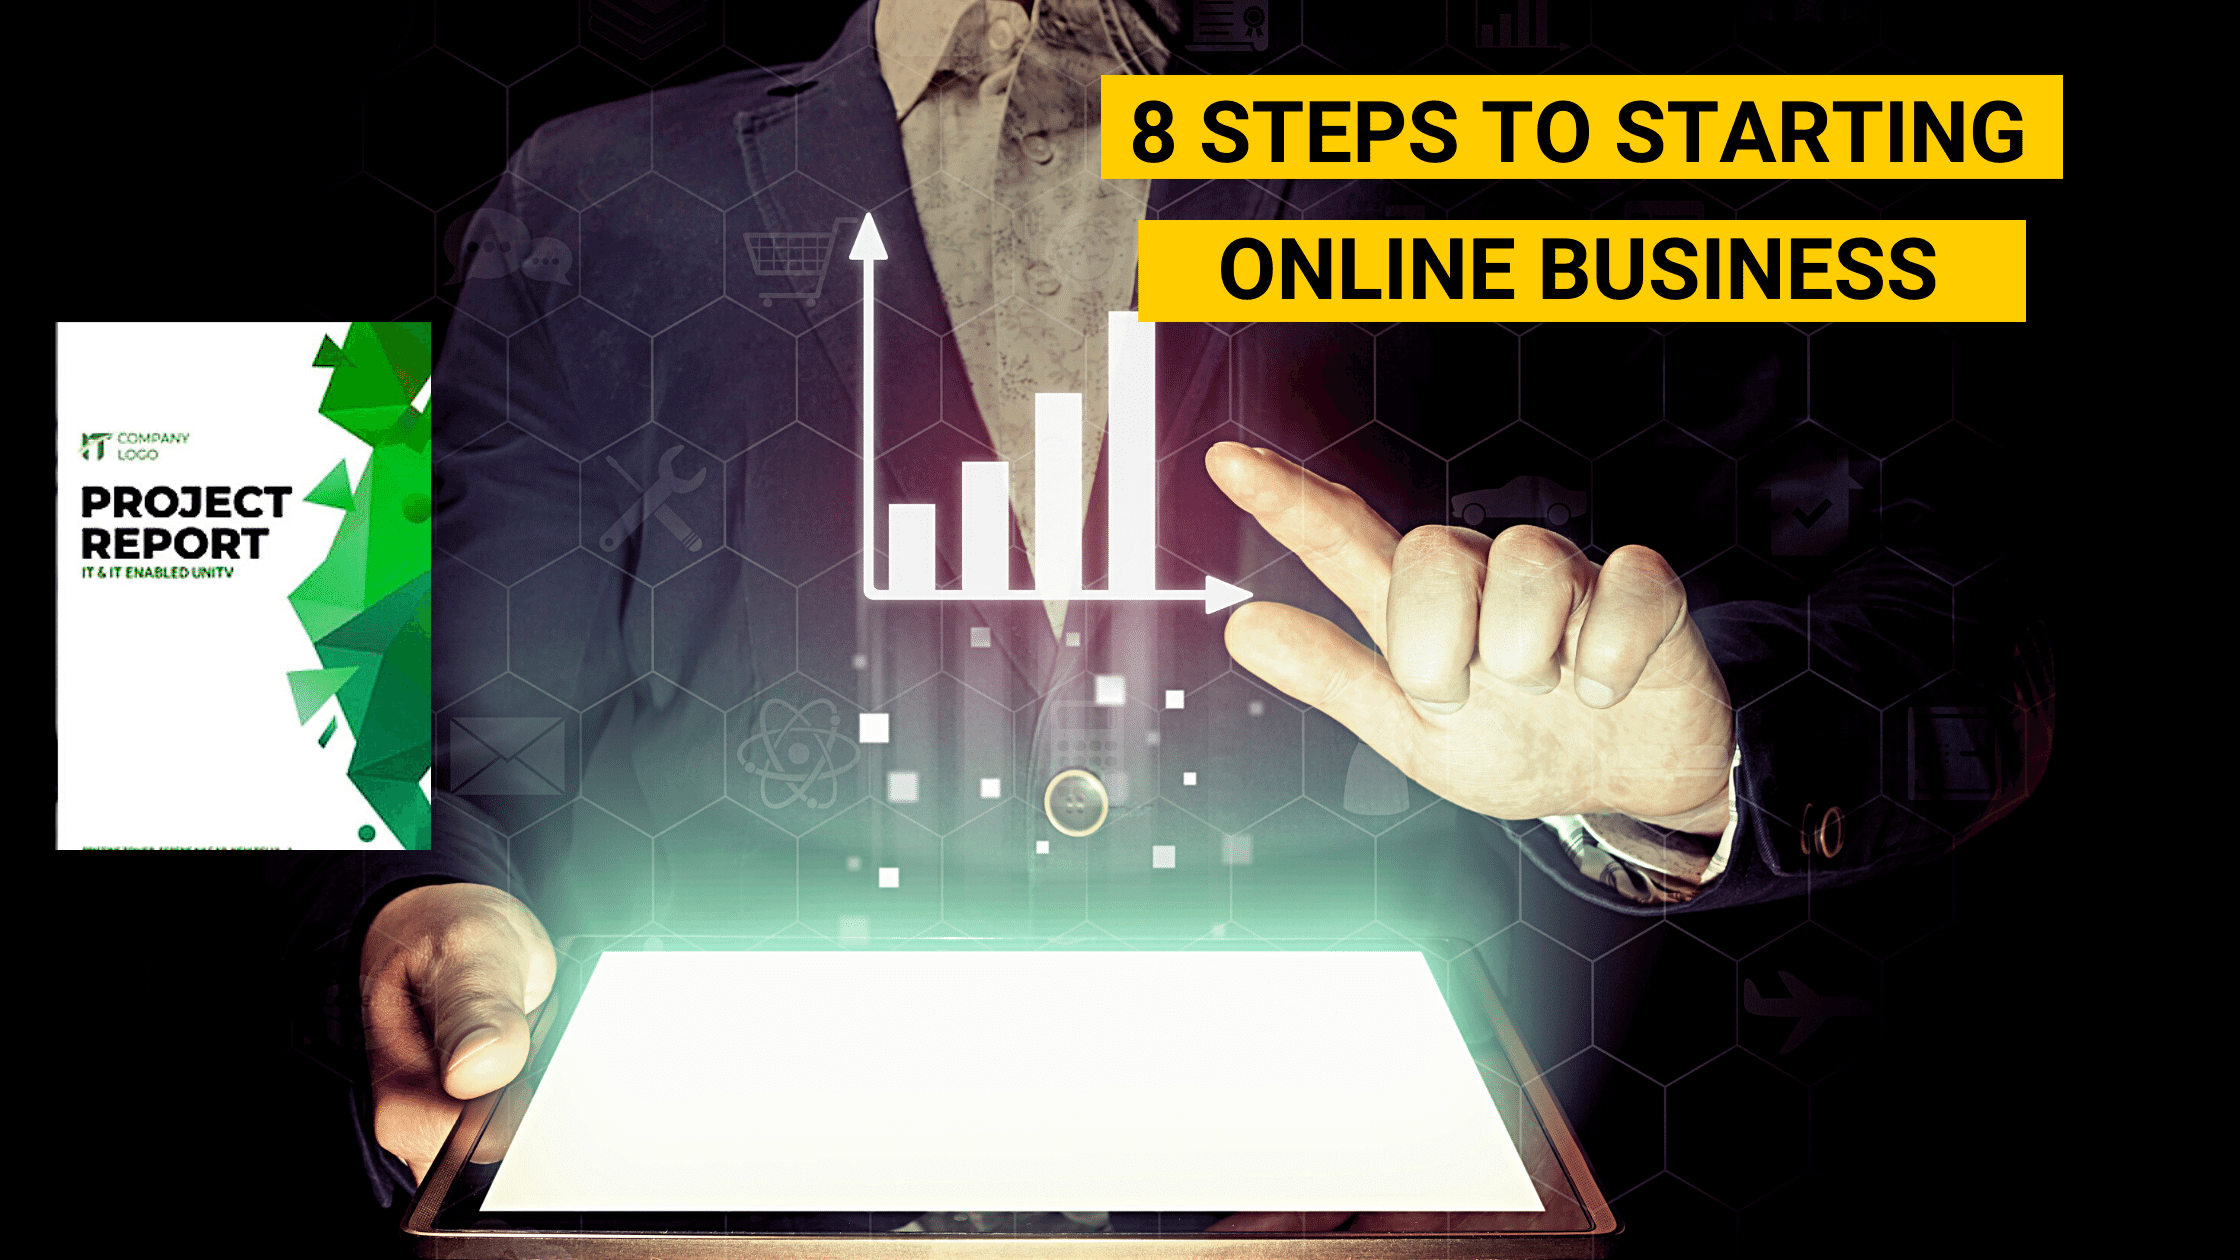 8 steps to starting online business